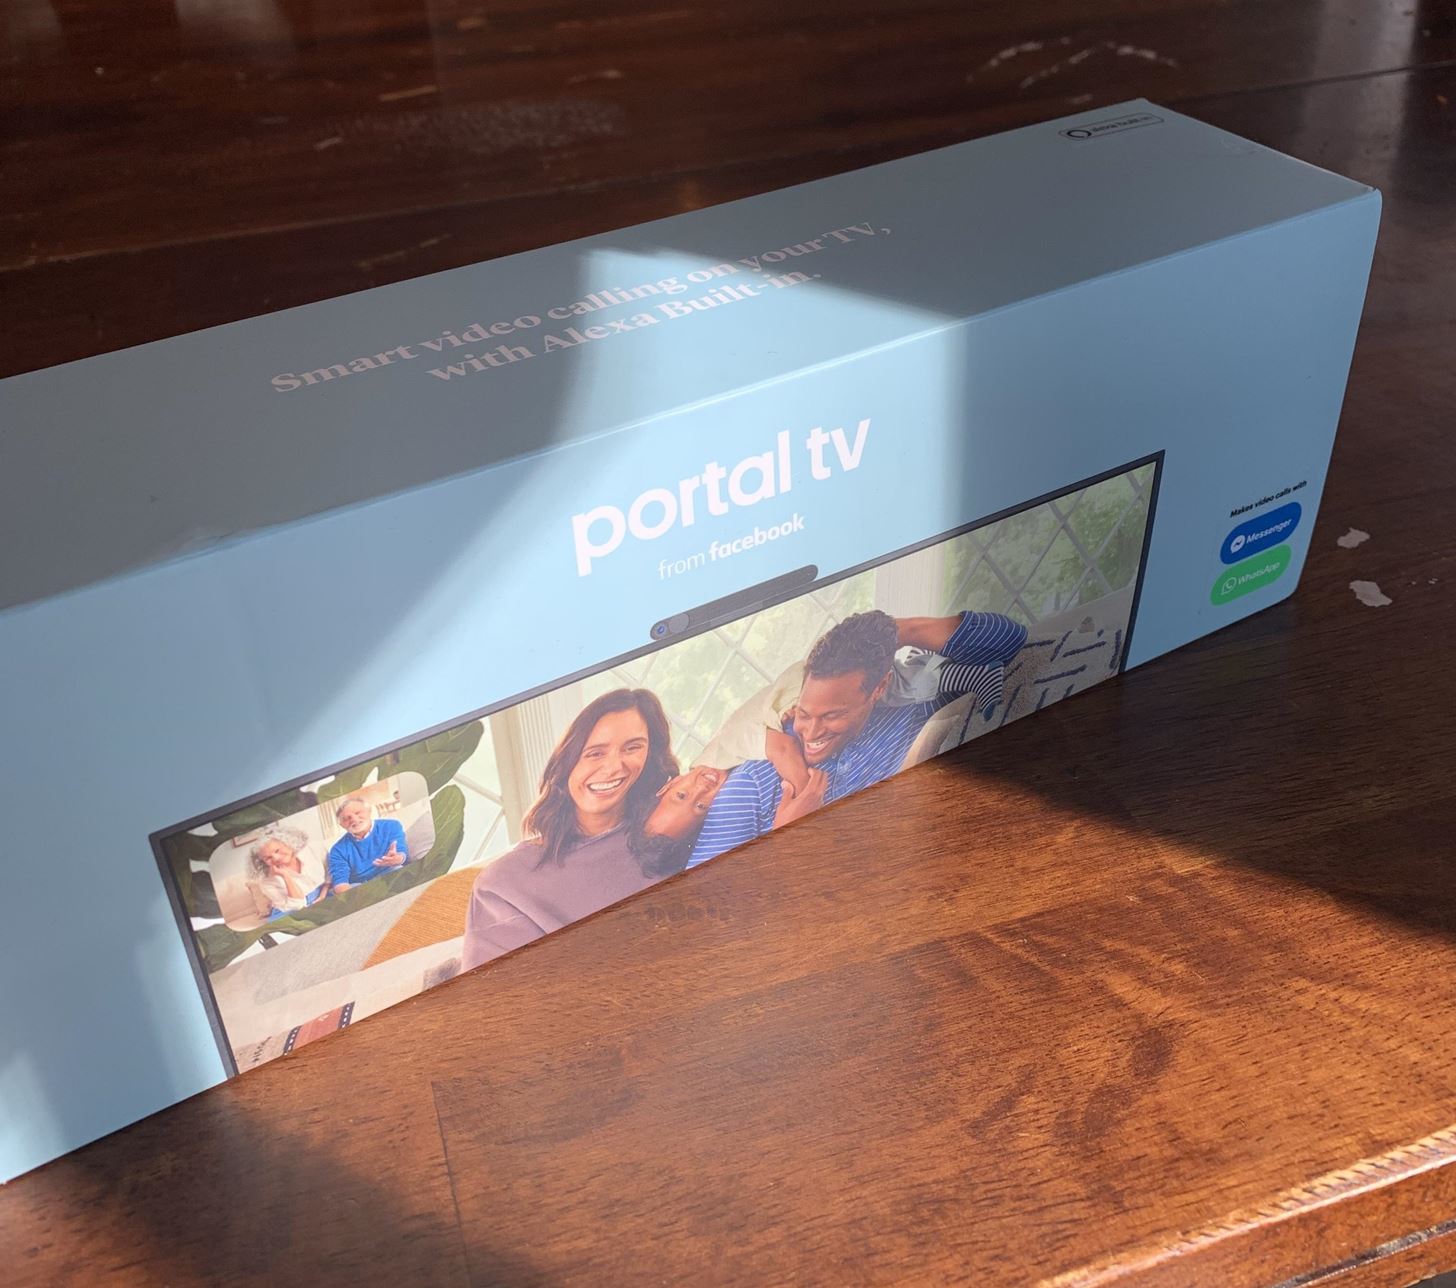 Hands-On: Facebook Pioneers Augmented Reality for the TV with Latest Portal Hardware